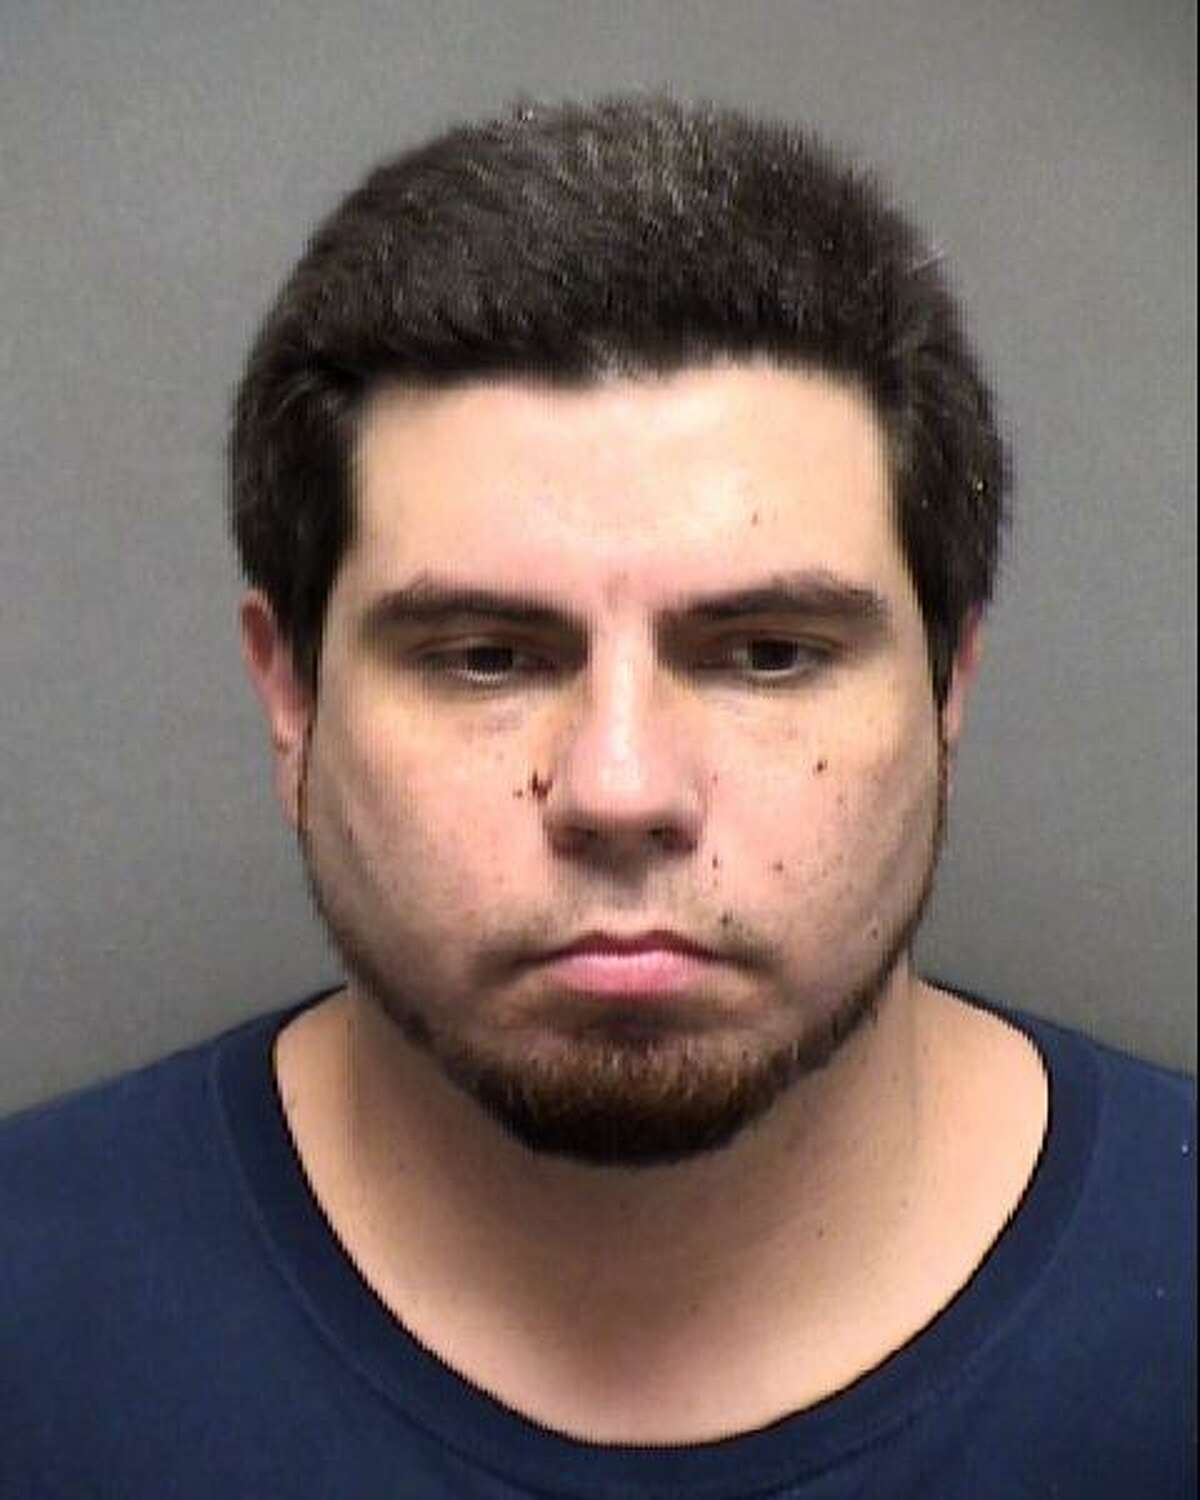 John Fuentes, 37, was sentenced to 12 years in prison for one count of promoting child pornography.